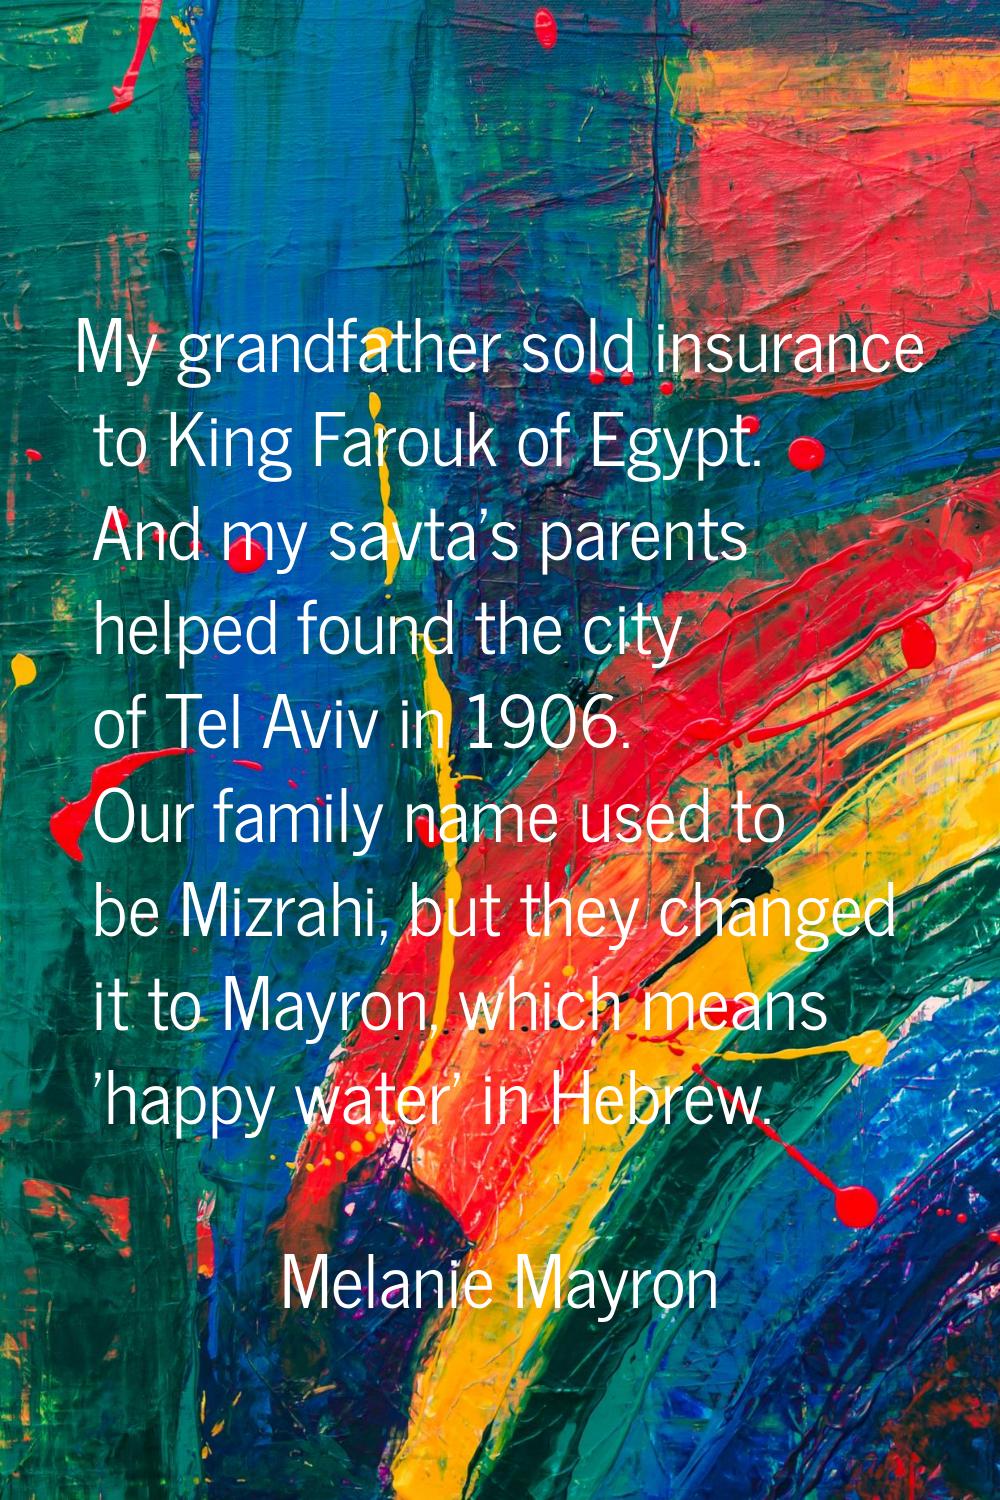 My grandfather sold insurance to King Farouk of Egypt. And my savta's parents helped found the city